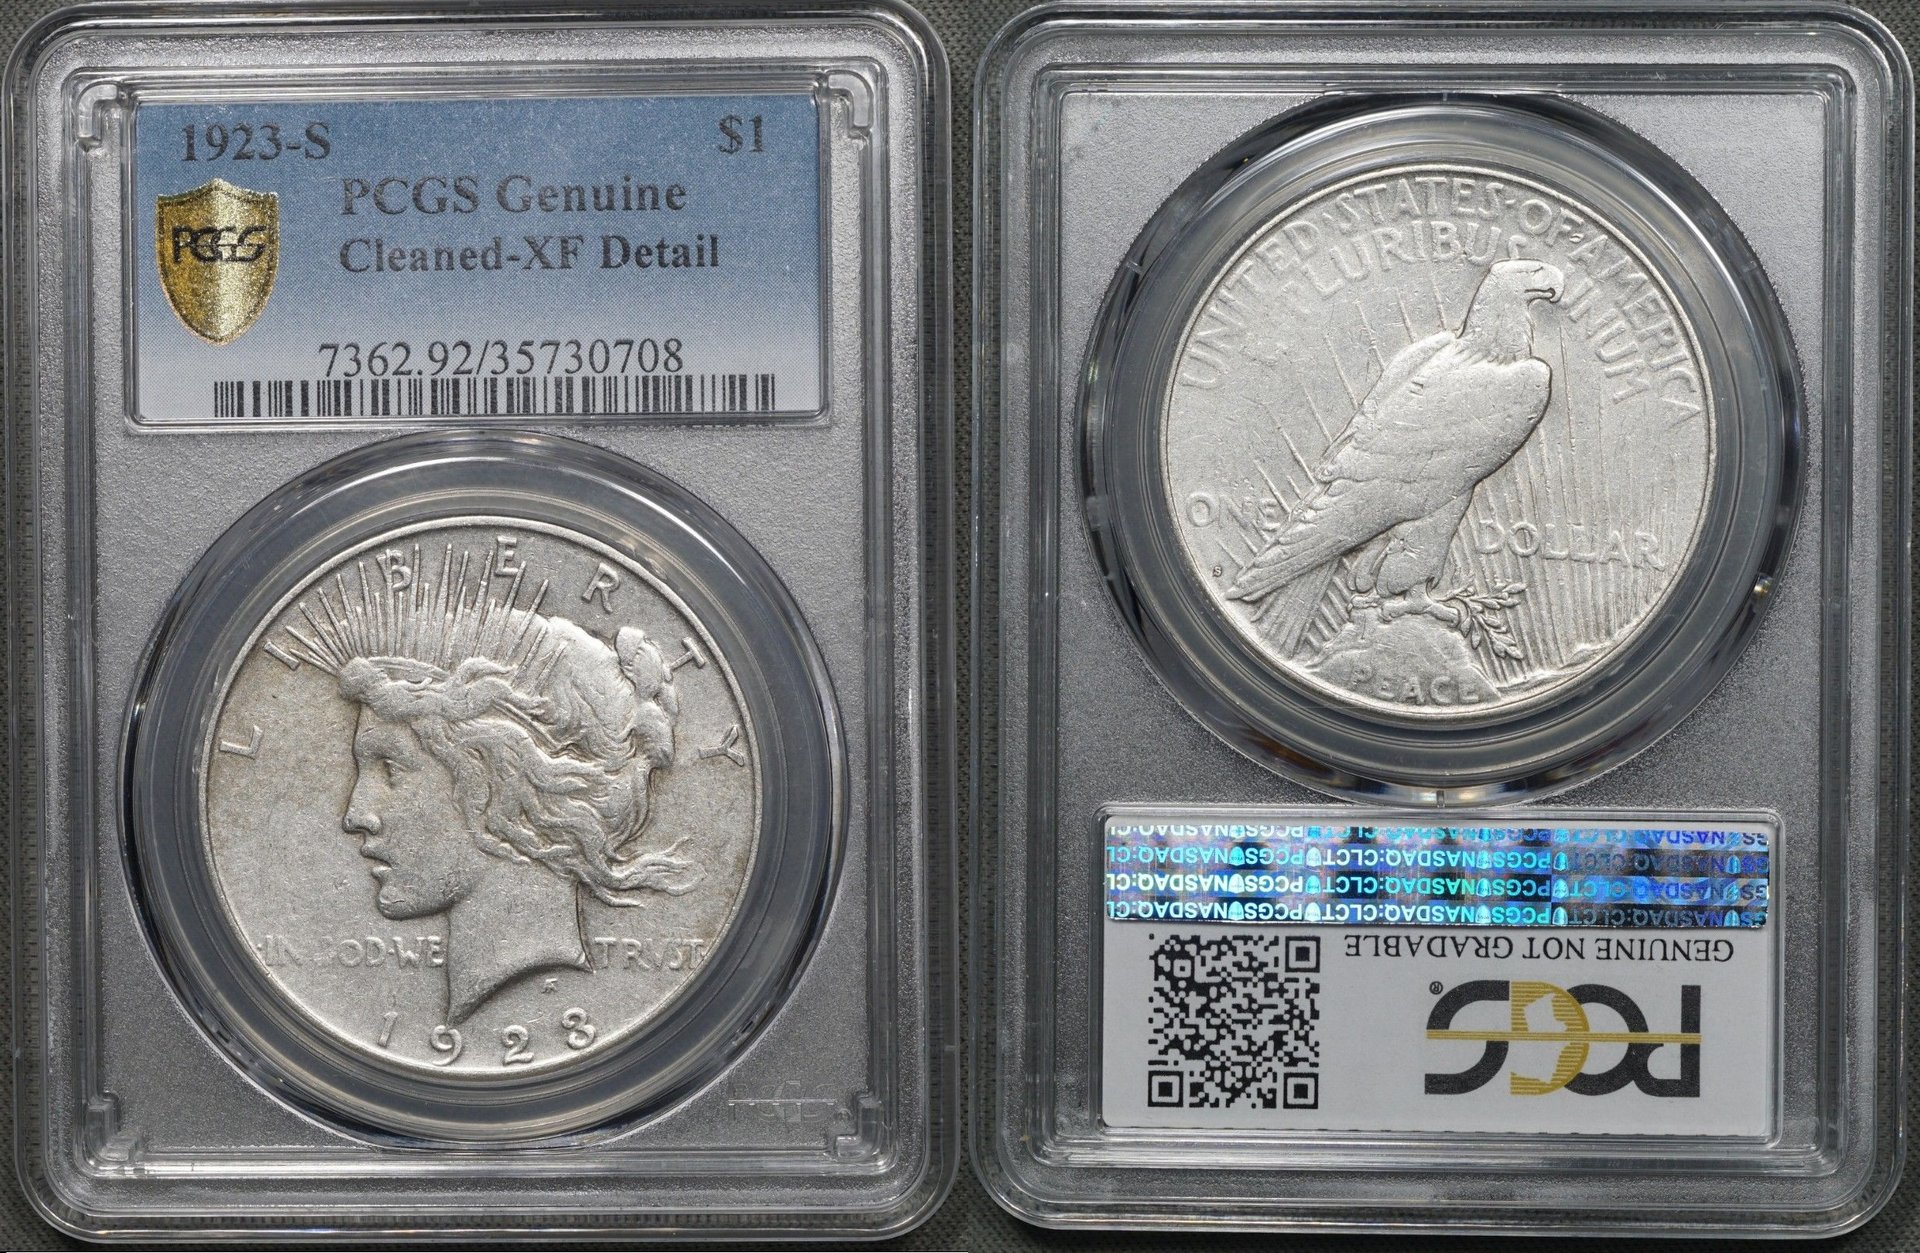 1923-S Peace Silver Dollar $1 PCGS Xf Details, Cleaned   $27. + 000  occoindealer .jpg